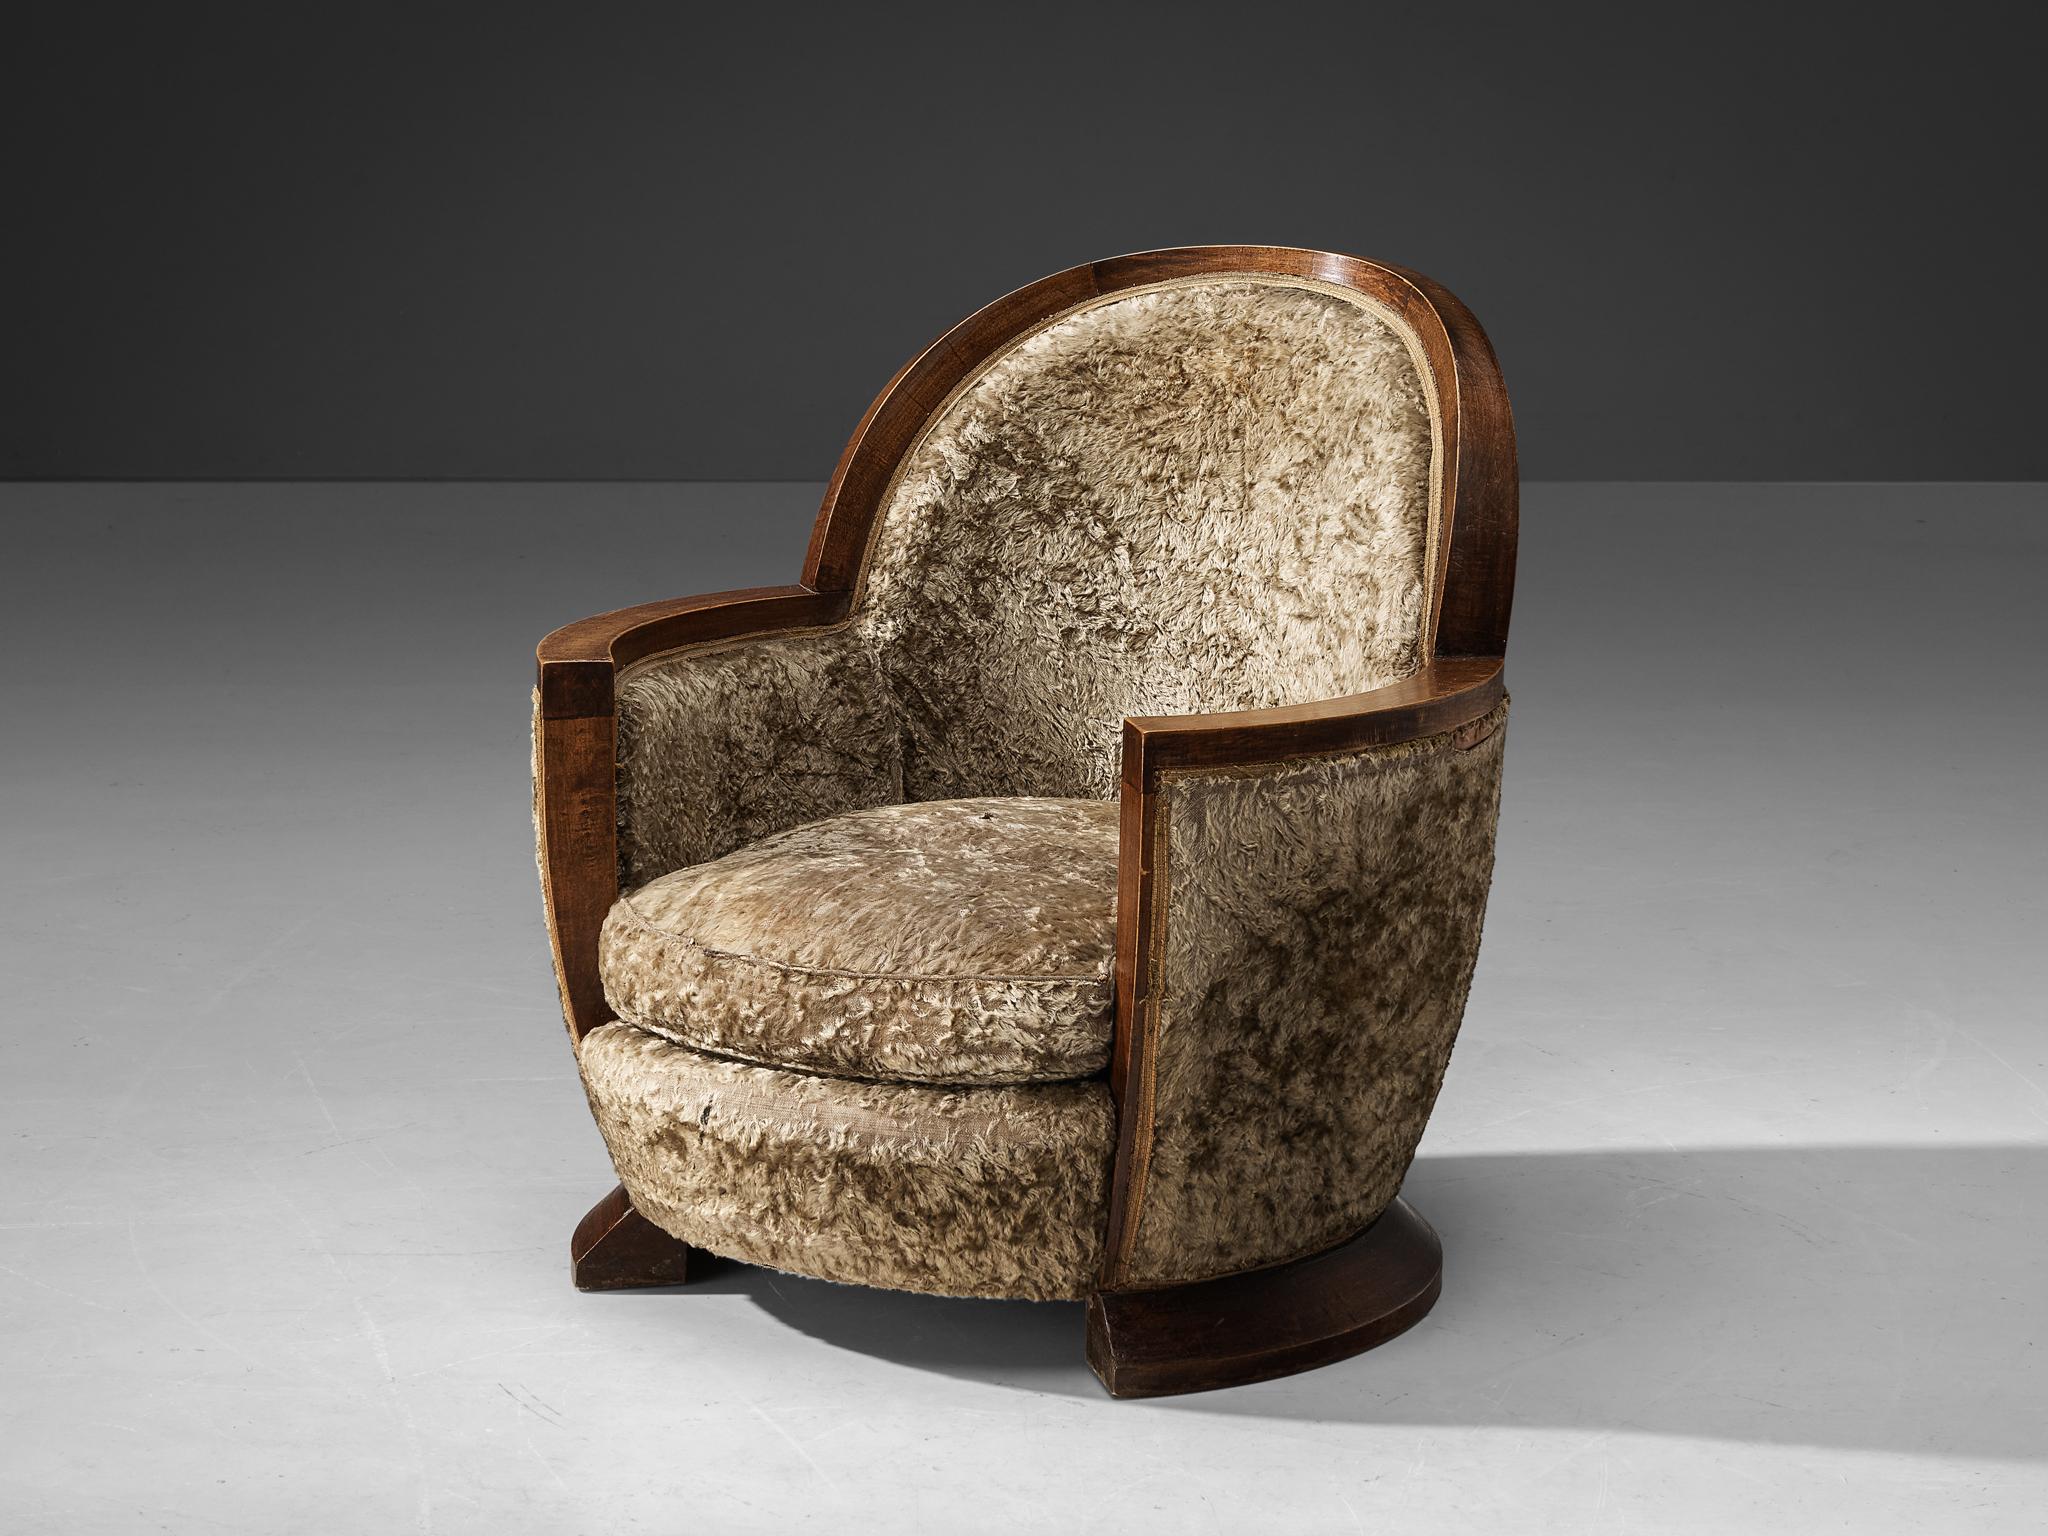 Gabriel Englinger, lounge chair, wood, long pile velvet upholstery, France, 1928.

This rare Art Deco armchair, designed by the esteemed designer Gabriel Englinger in 1928, epitomizes the luxury and sophistication of the era. The chair is